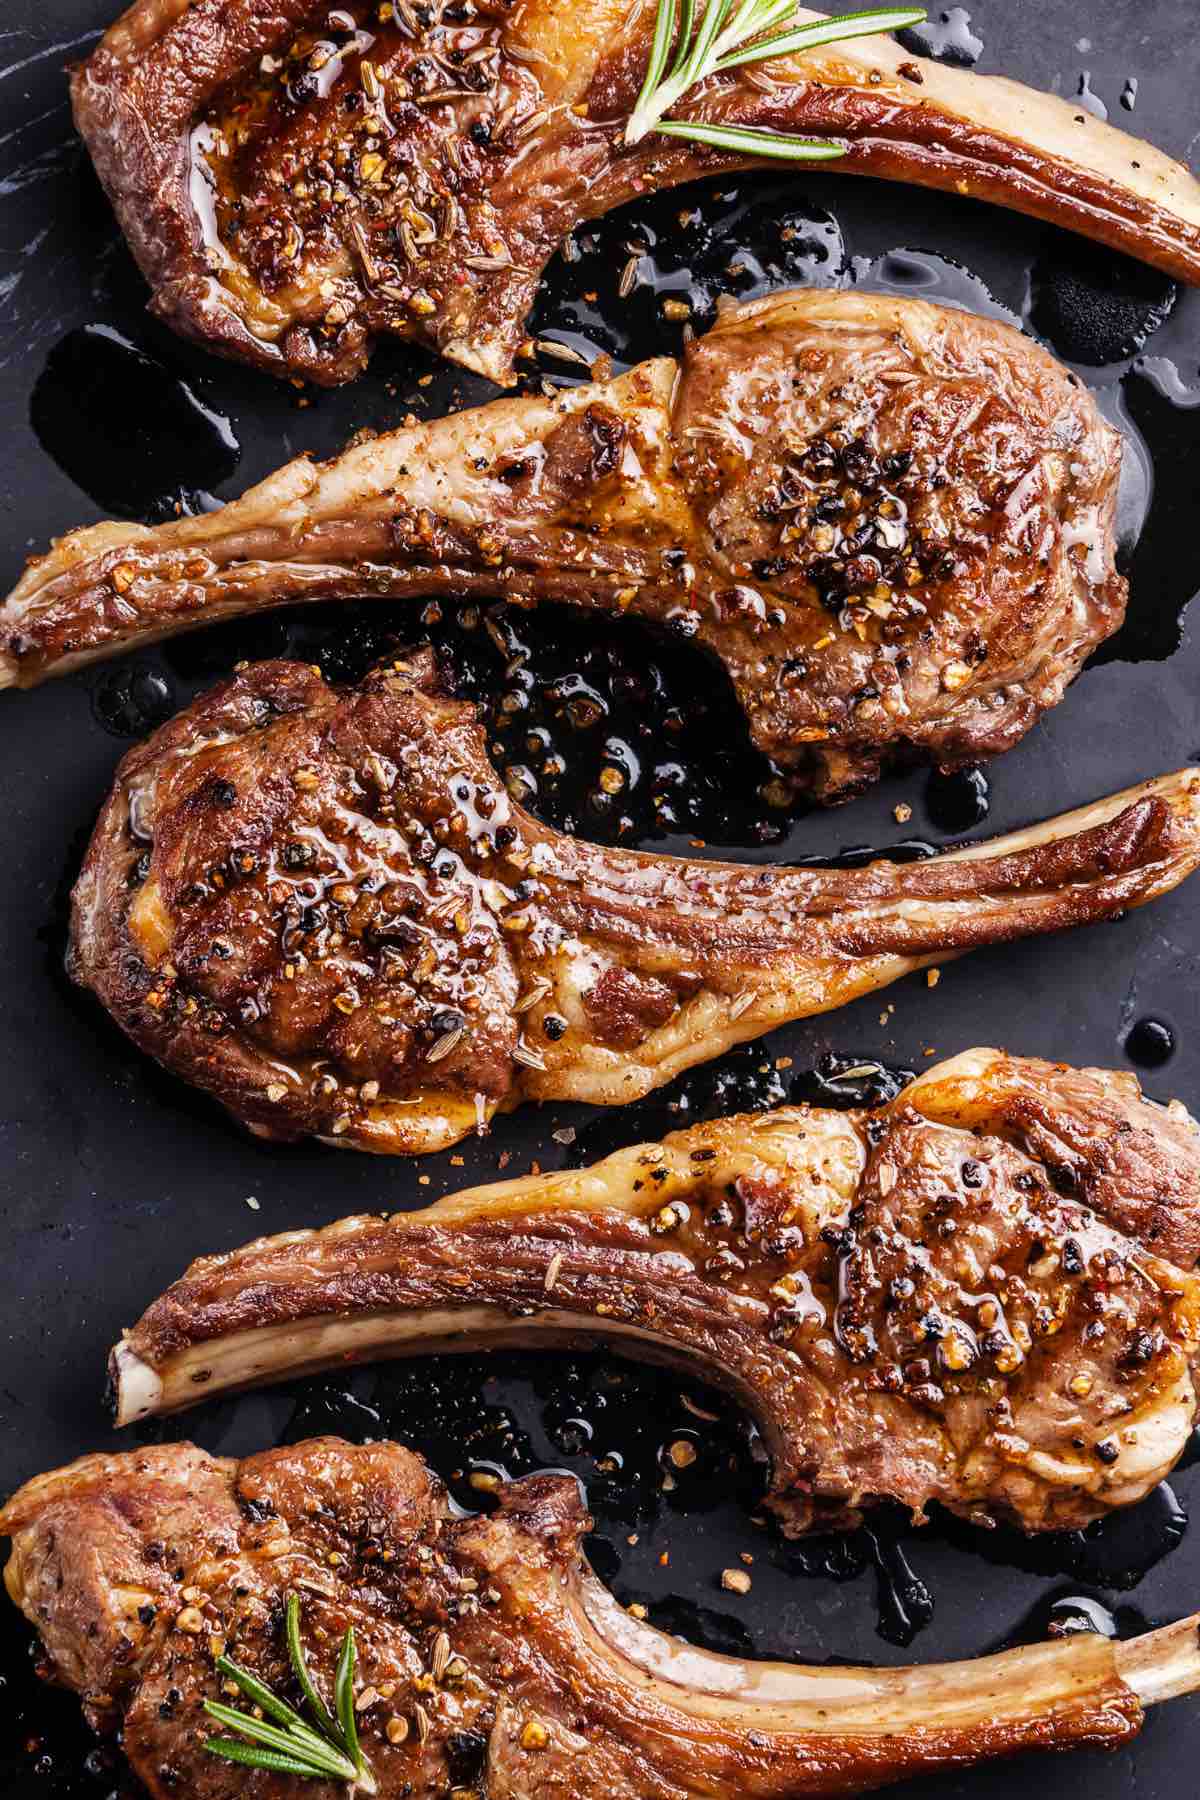 Typically served during holidays or special occasions, lamb chop, roasted rack, or lamb legs are a gourmet meal that will have you savor every bite! Did you know there's also an art to pairing it with proper sides. We've rounded up the 18 Best Side Dishes For Lamb and you can explore what to serve for your next lamb dinner. They'll take your lamb chops to a new level!